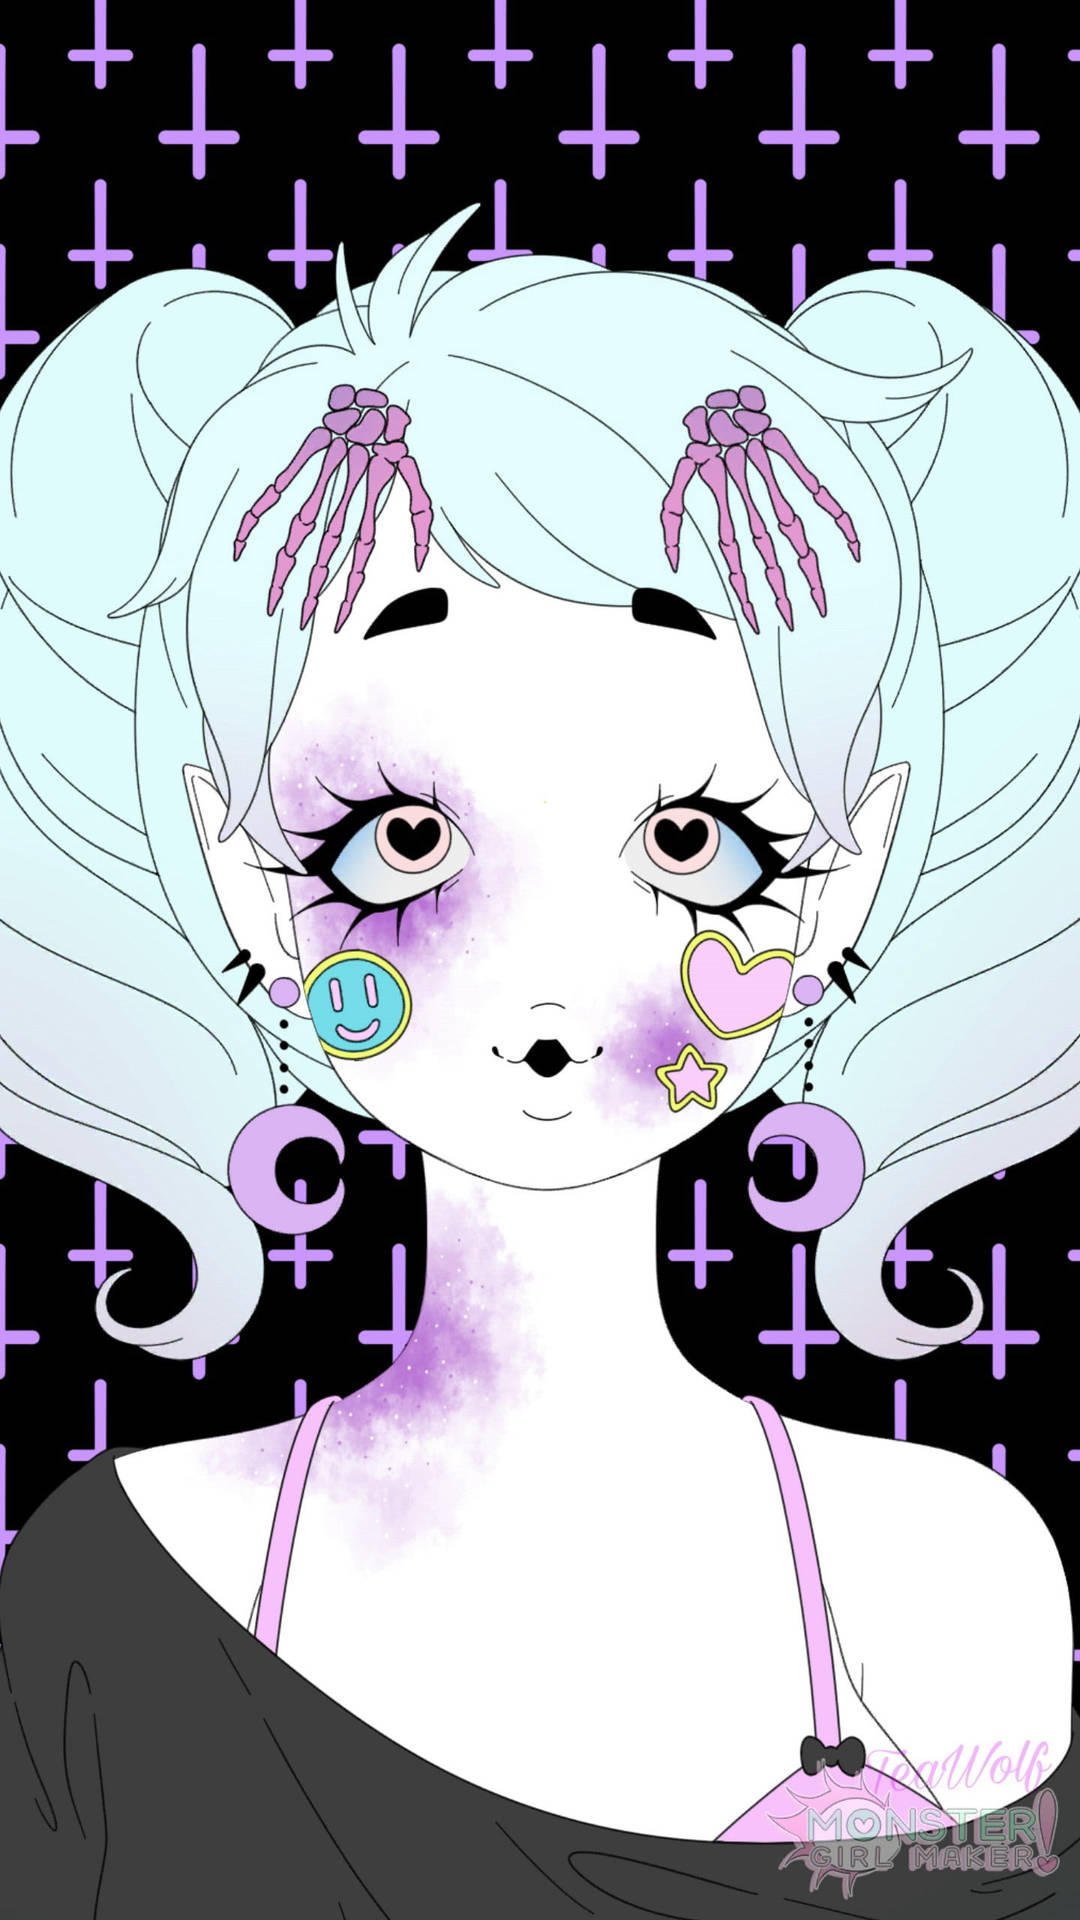 Pastel Goth Girl: The Subtle Edge of Creepy and Cute Wallpaper